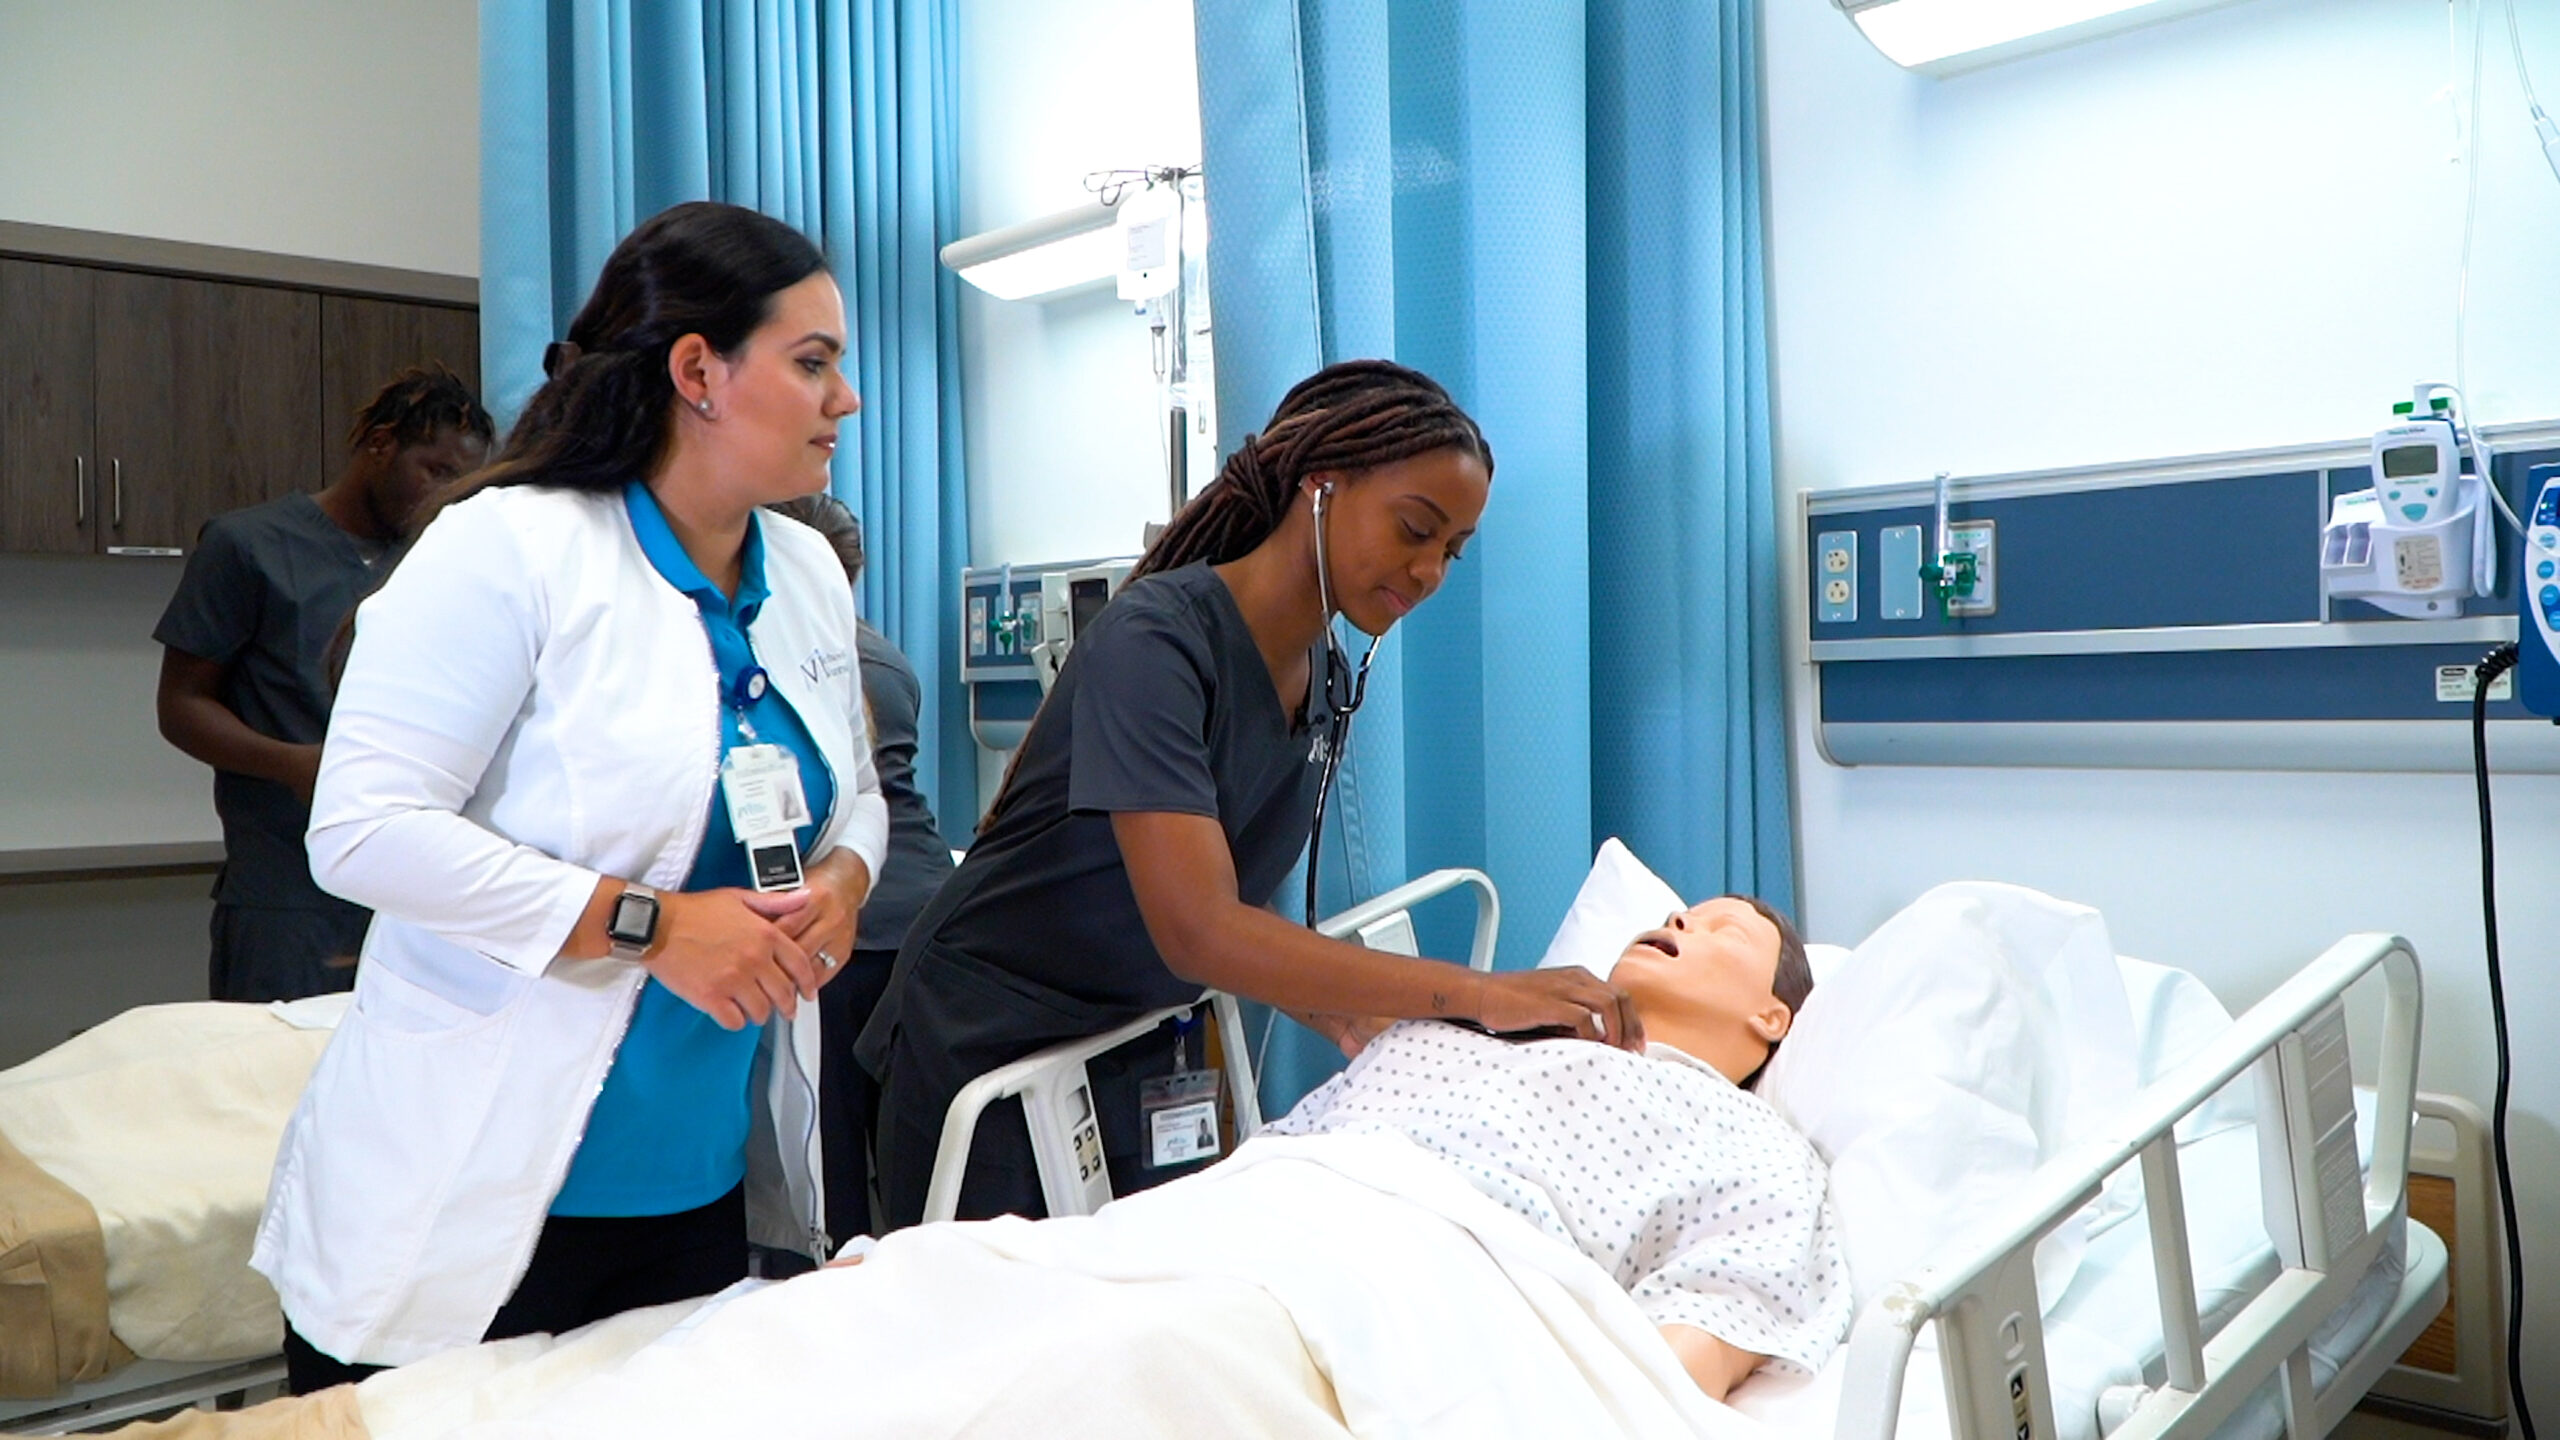 An FVI nursing instructor watches as a nursing student performs health checks on a patient simulator in a skills lab